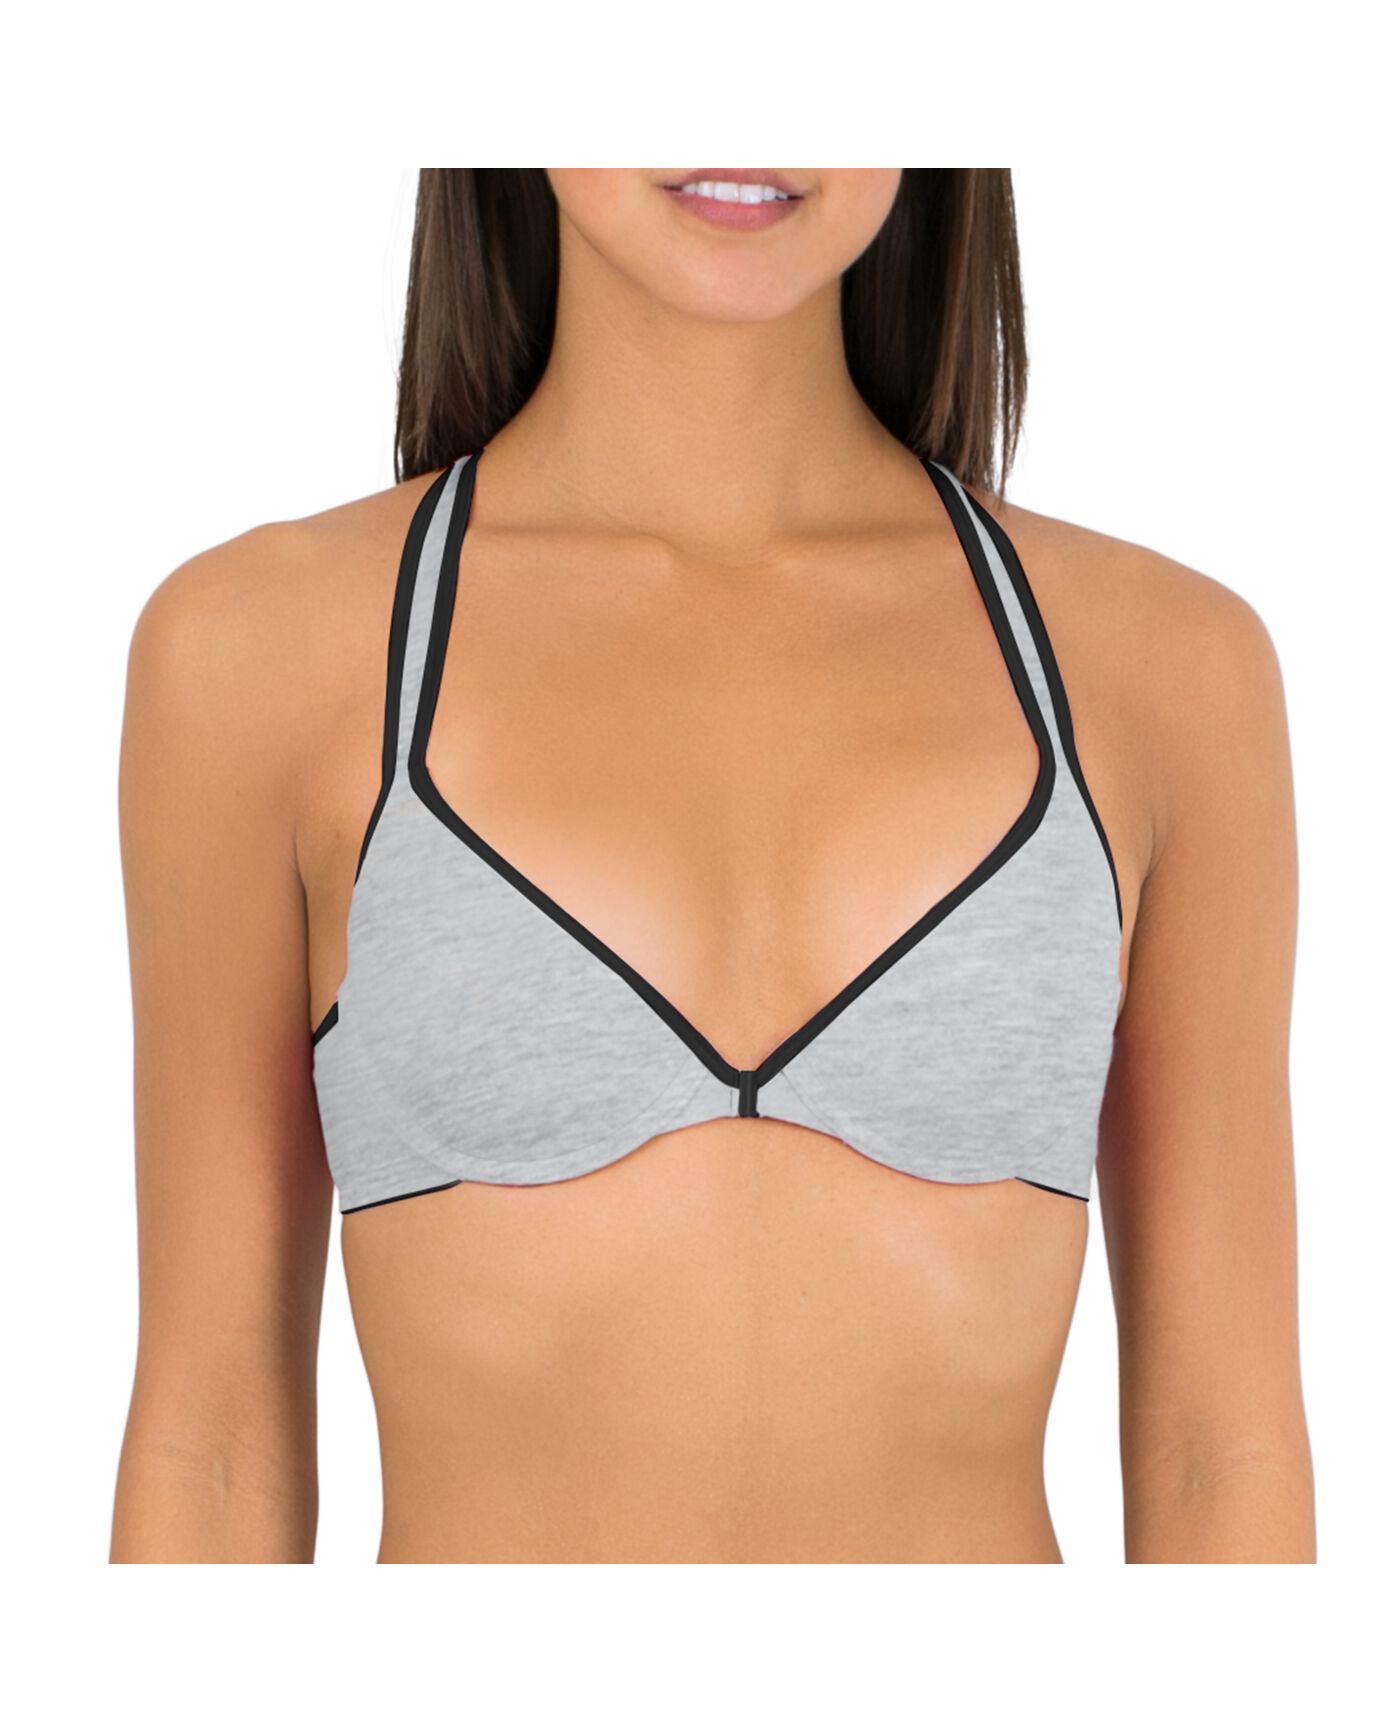 Fruit of the Loom Bras $5 at